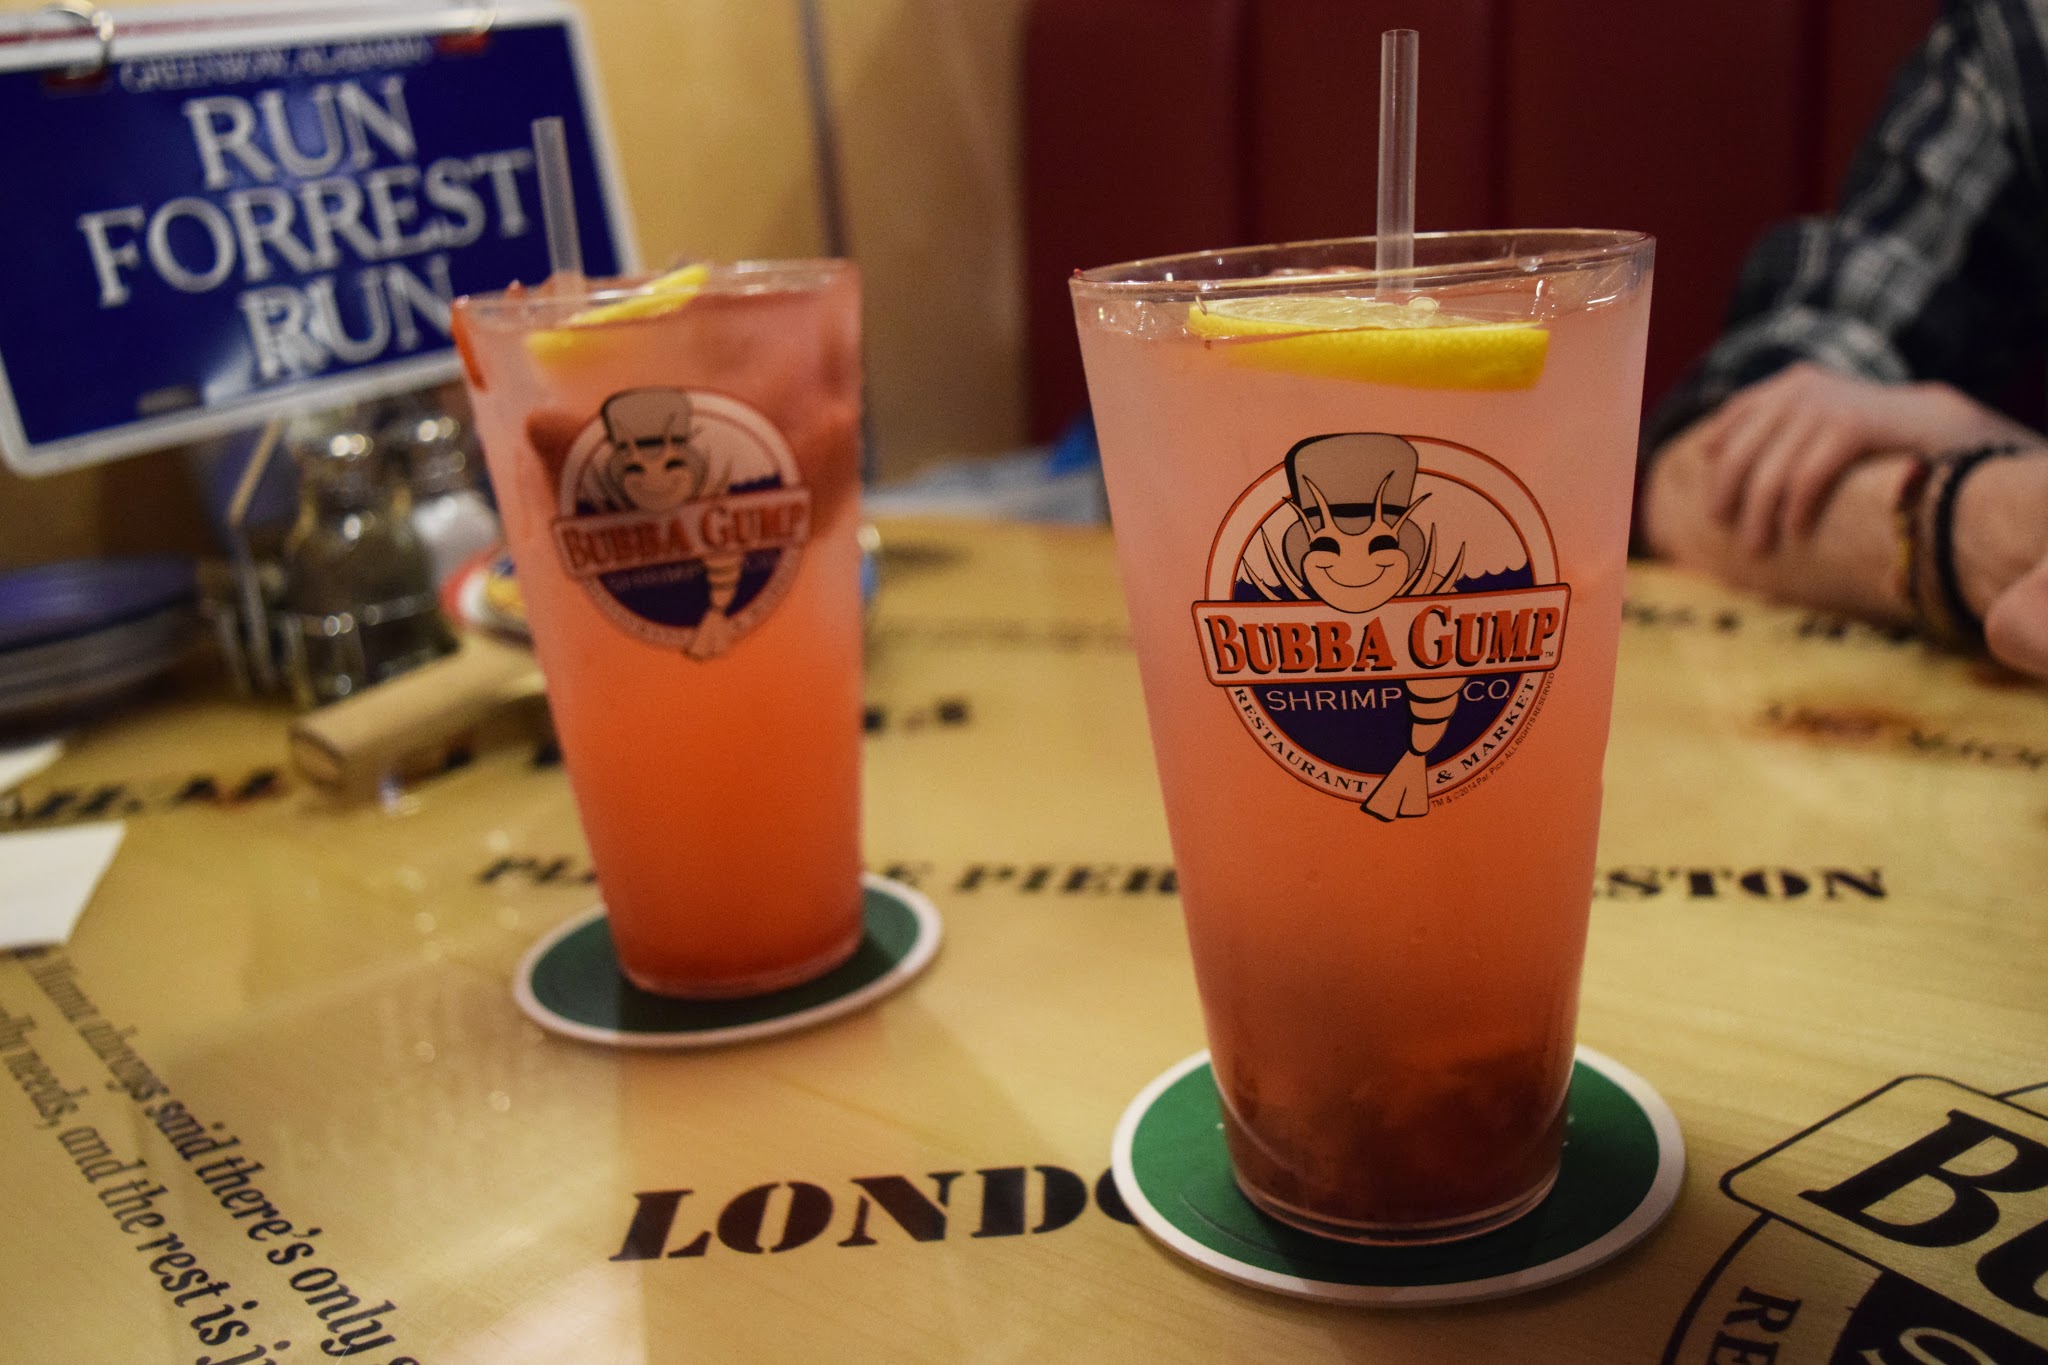 A close up shot of the strawberry lemonade drinks we ordered